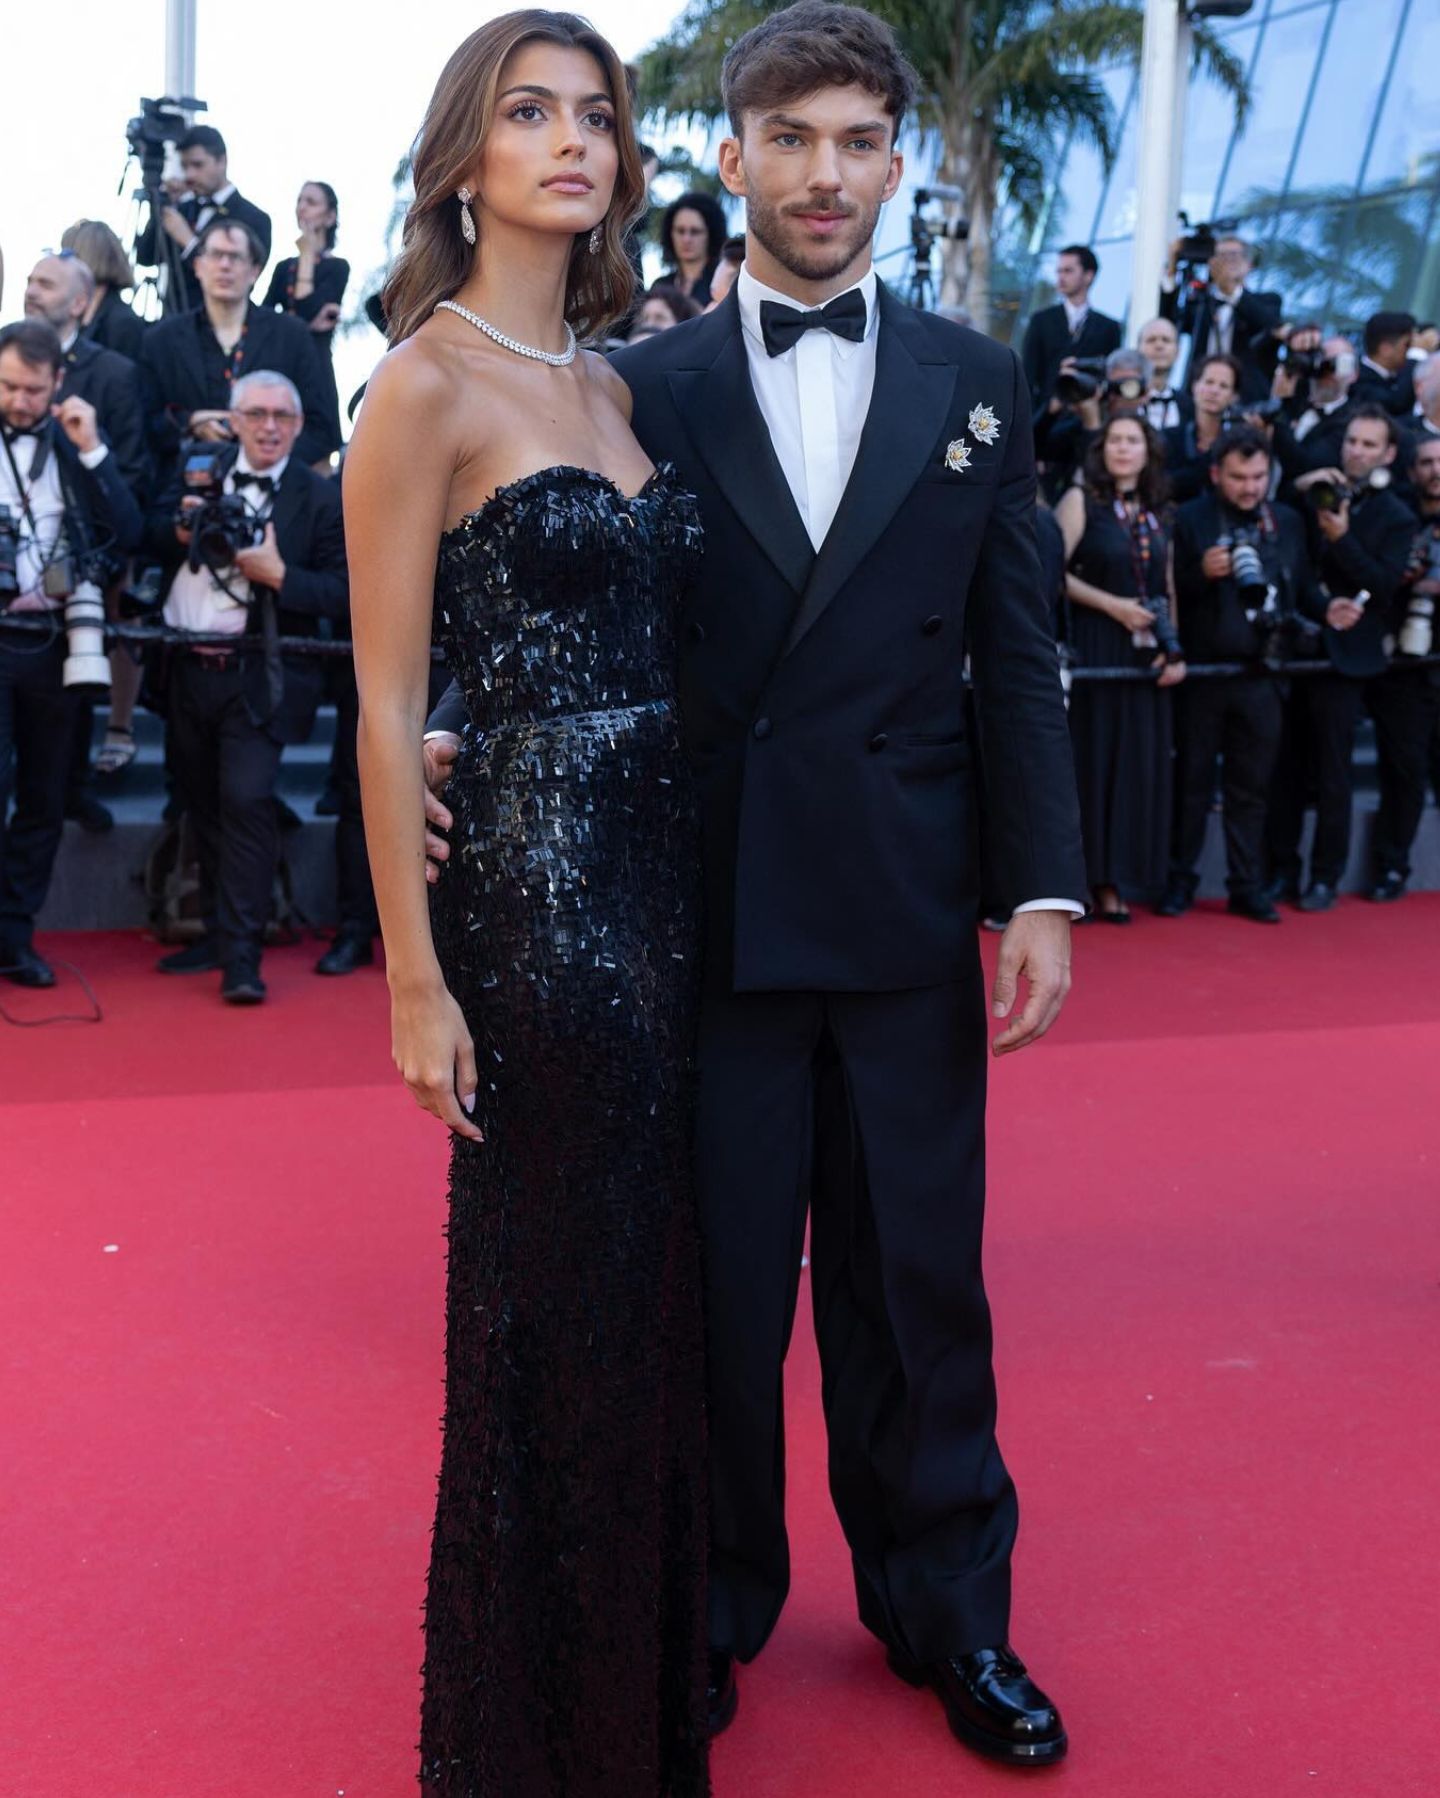 Pierre Gasly and girlfriend Francisca Gomes Cannes day 10